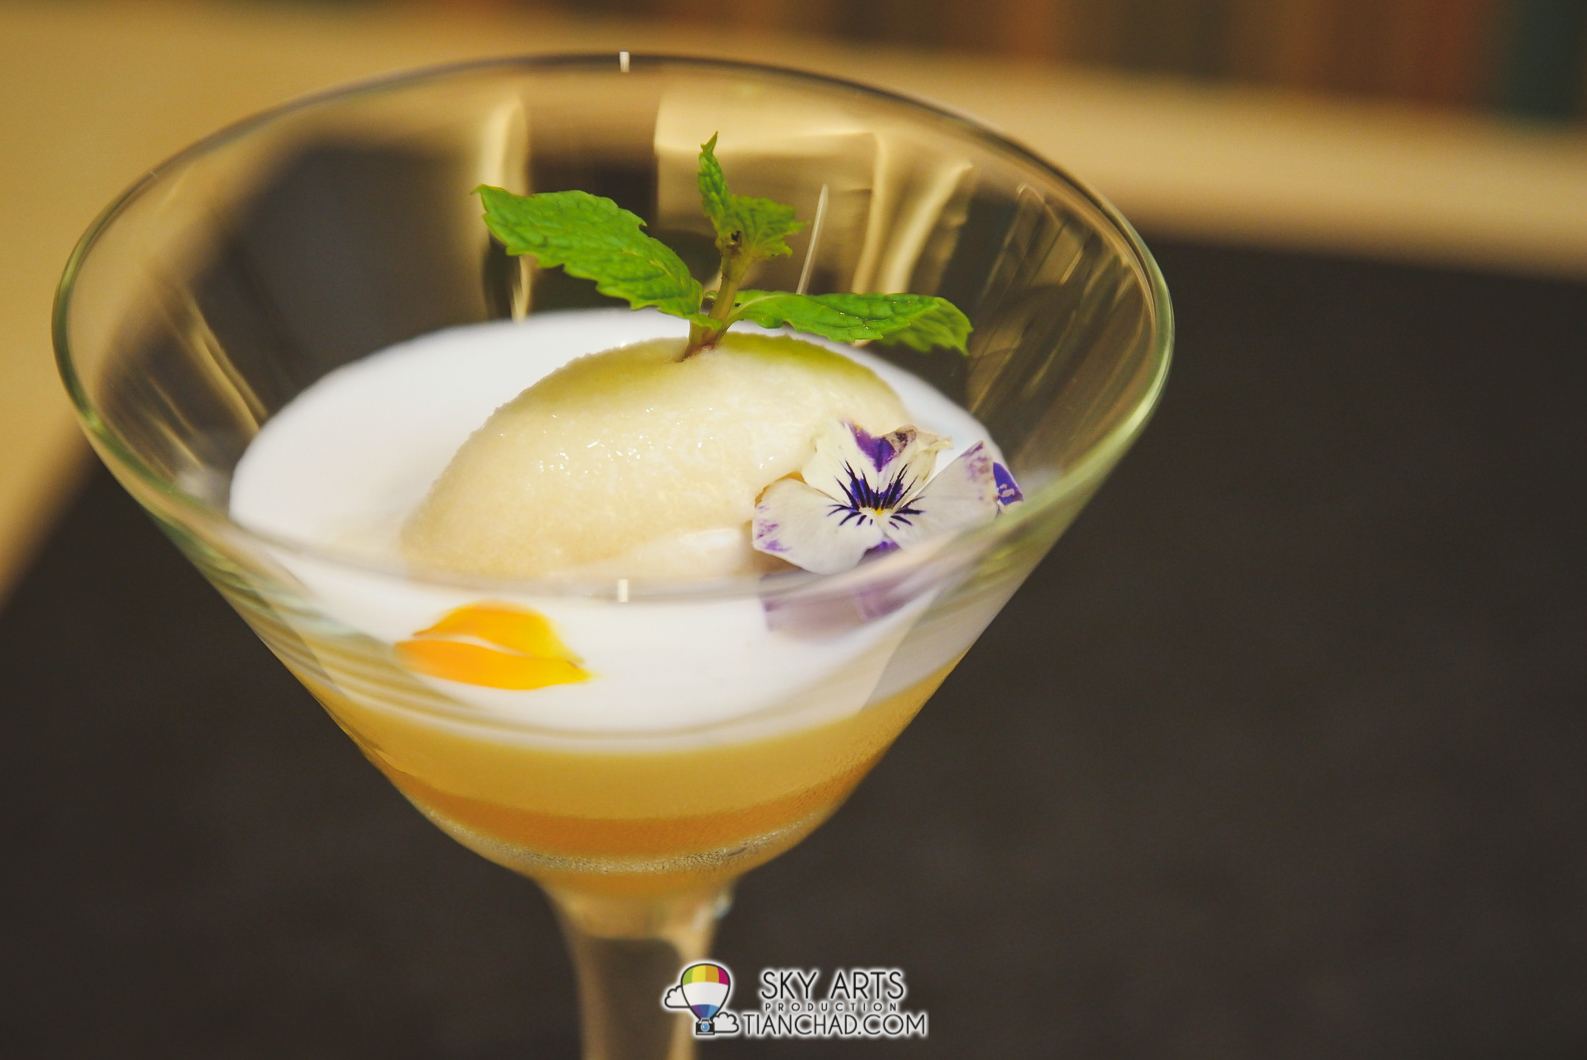 Coconut Bavarois with Pineapple Jelly in Pina Colada Style